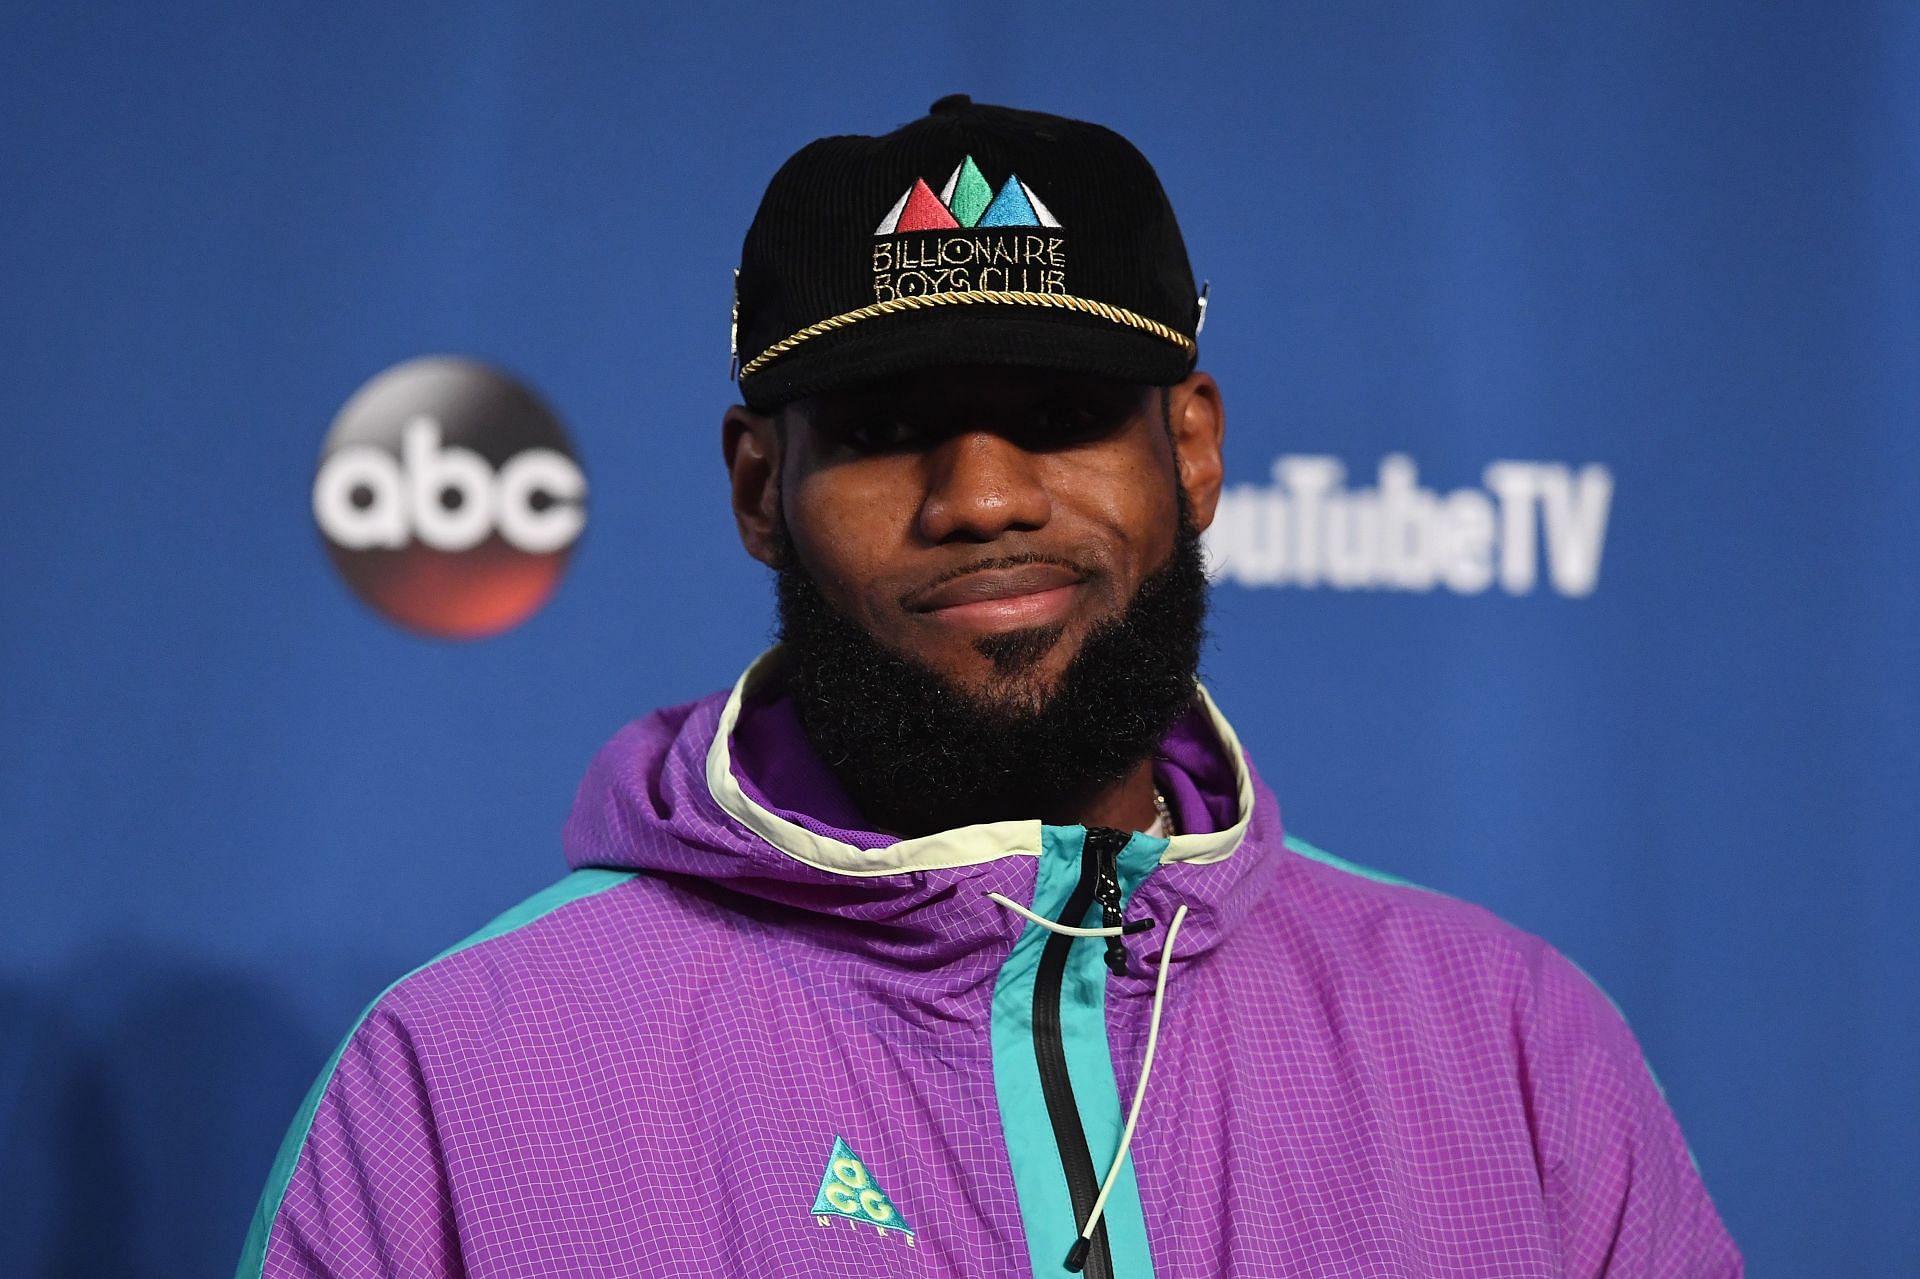 LeBron James will feature in his 18th All-Star game this weekend.